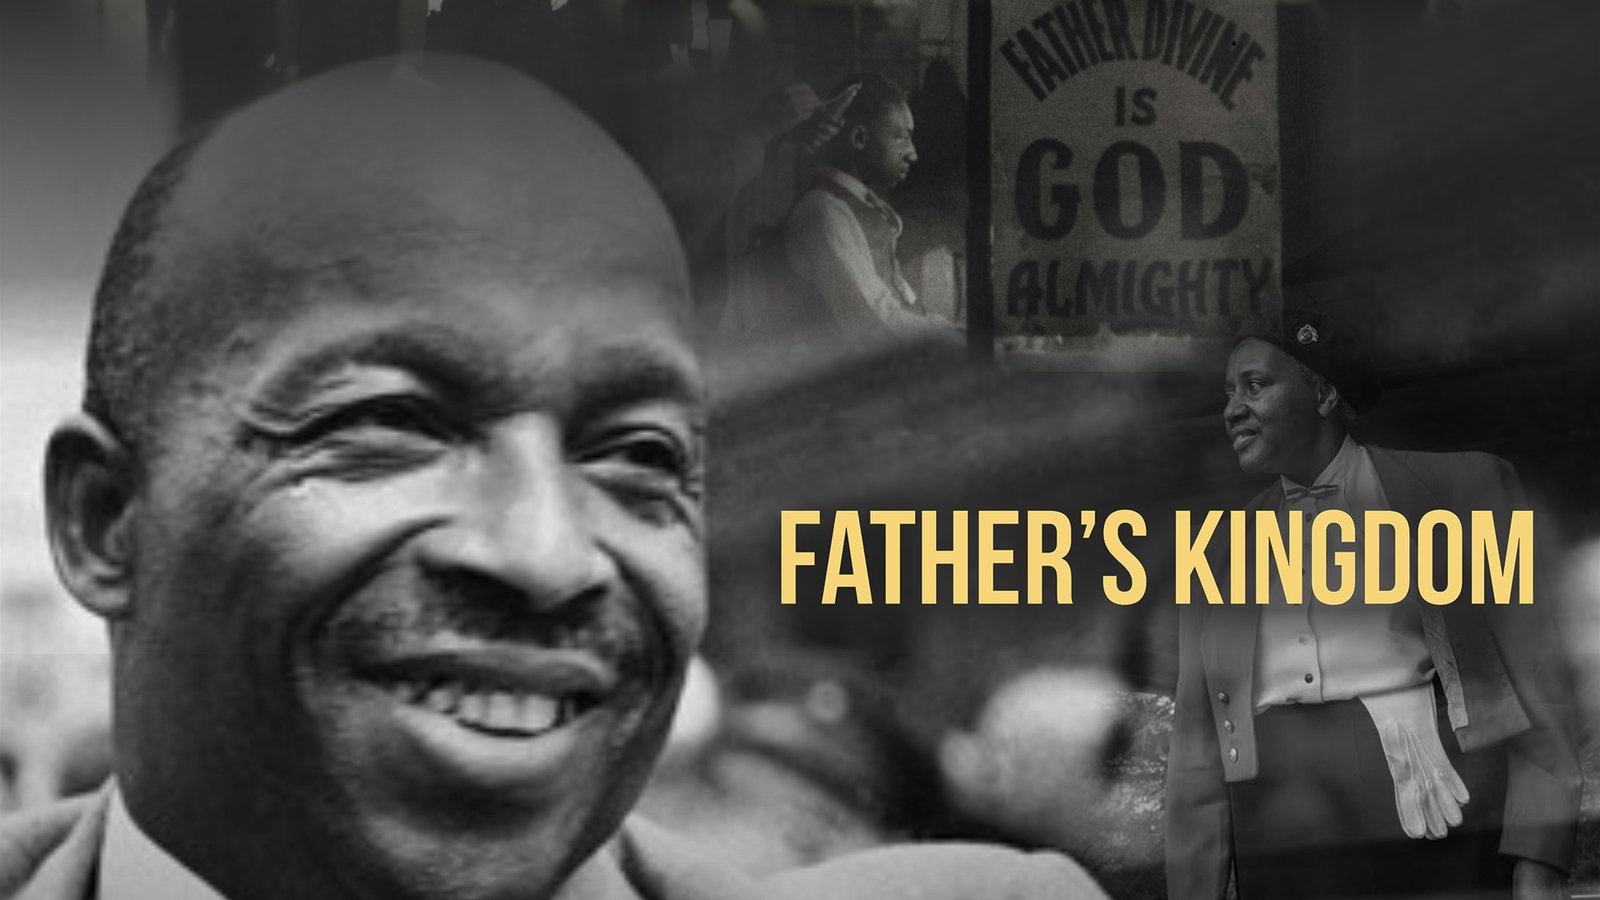 Father's Kingdom - The Life and Work of Activist Father Divine